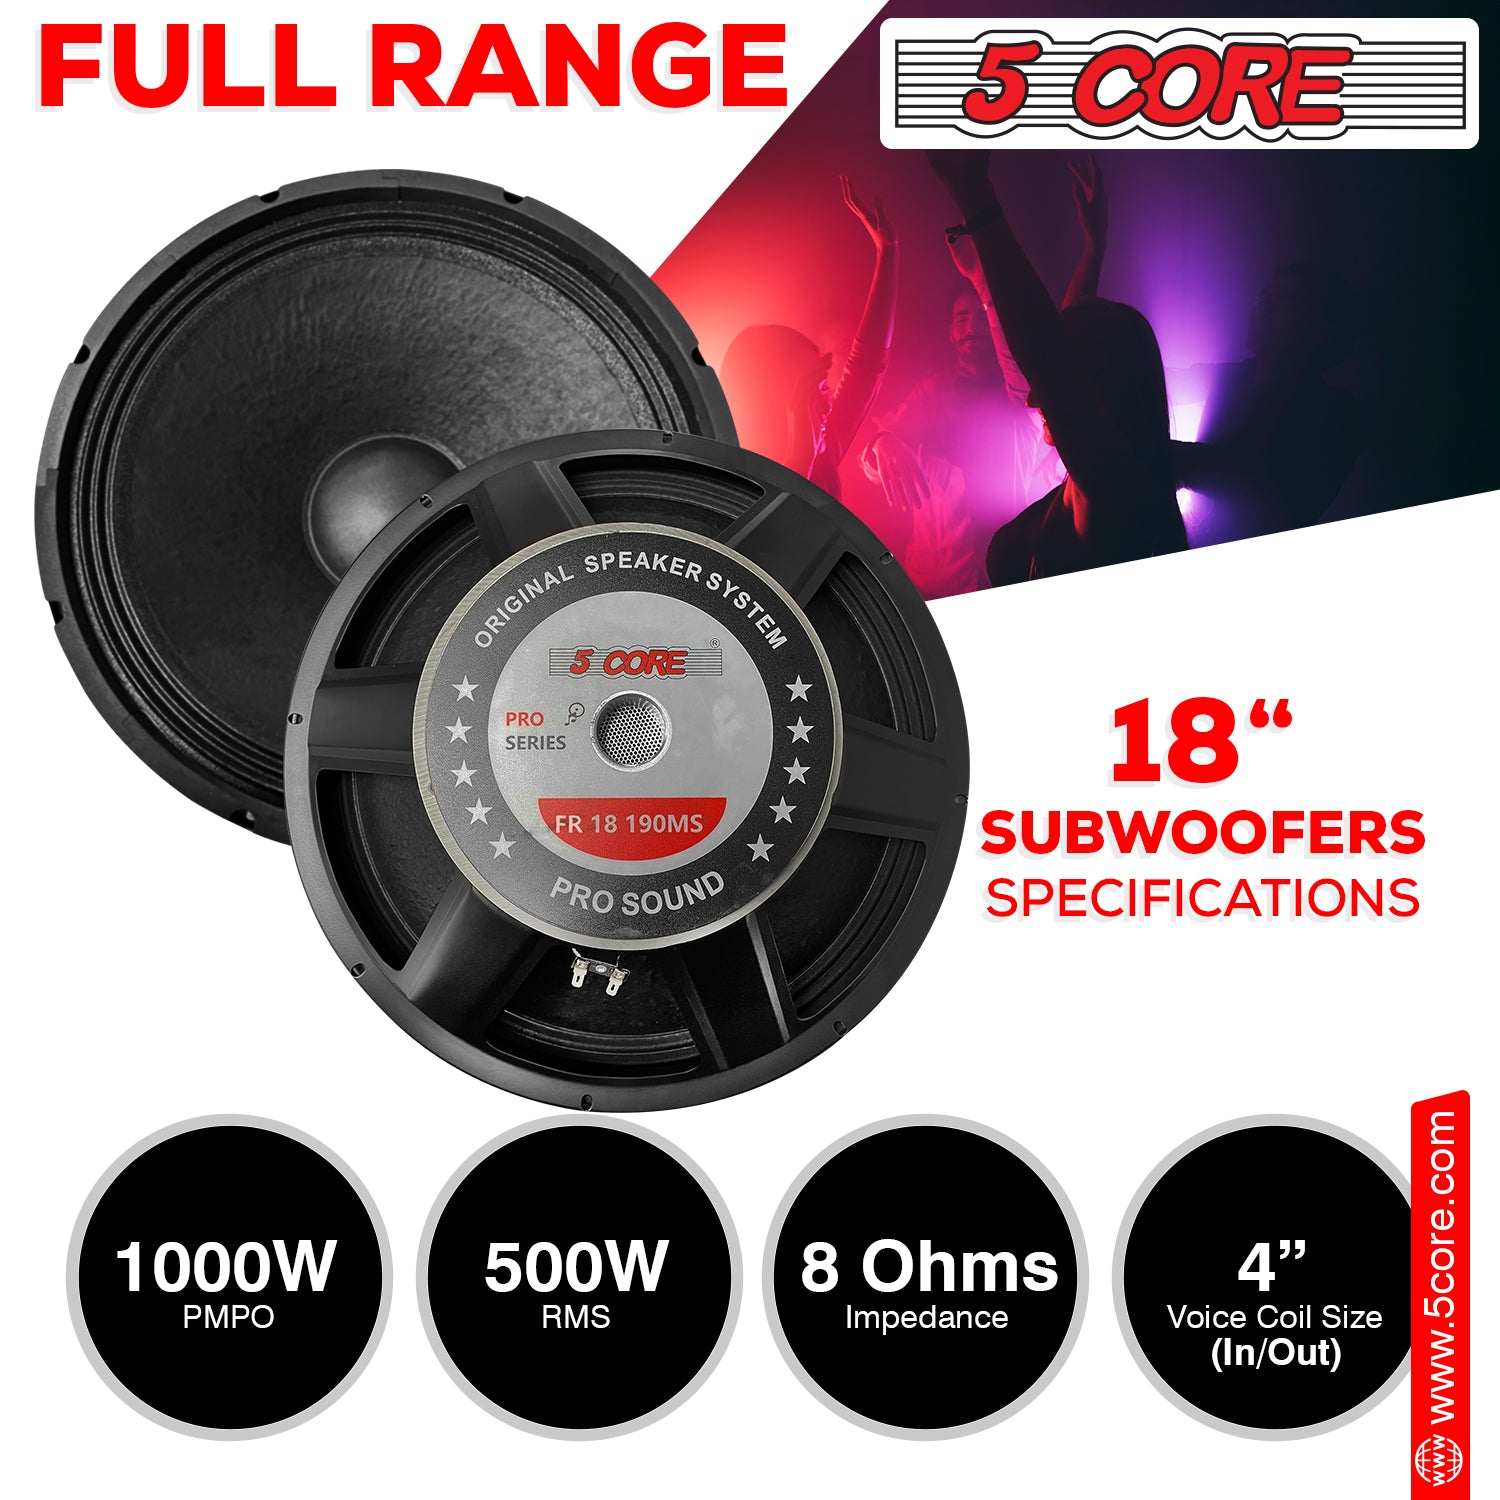 18 Inch Speaker – a high-performance, full-range powerhouse delivering 500W RMS, 1000w PMPO, 8 Ohms Impedance and 4 inch Voice coil size for immersive sound with thumping bass.